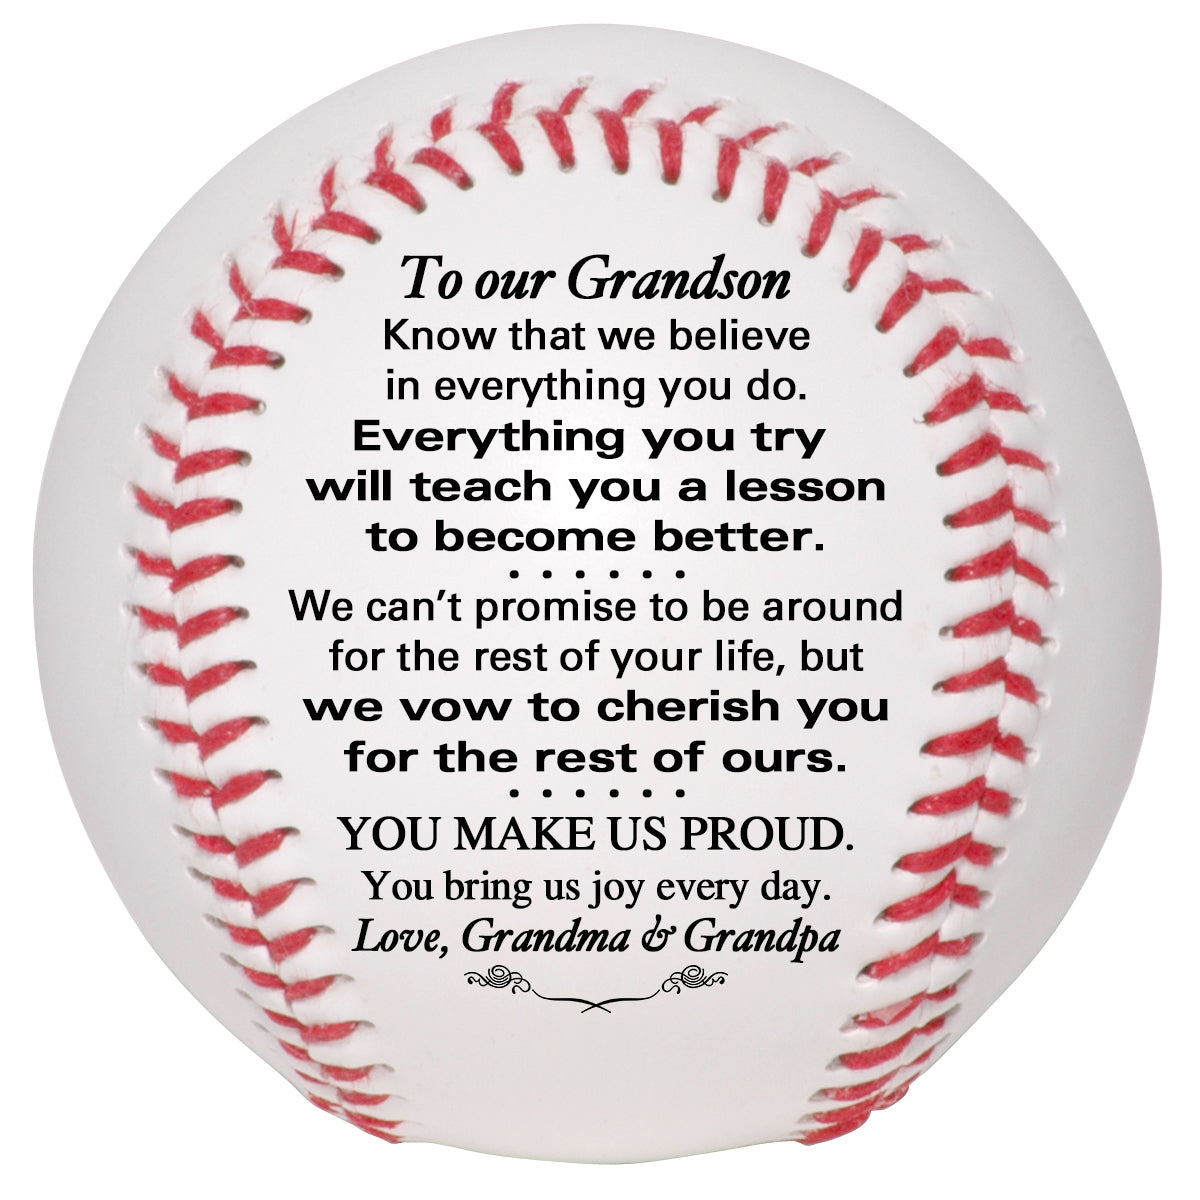 Personalized Grandson Baseball Keepsake - To Our Grandson - To My Grandson - To Our Son - To My Son